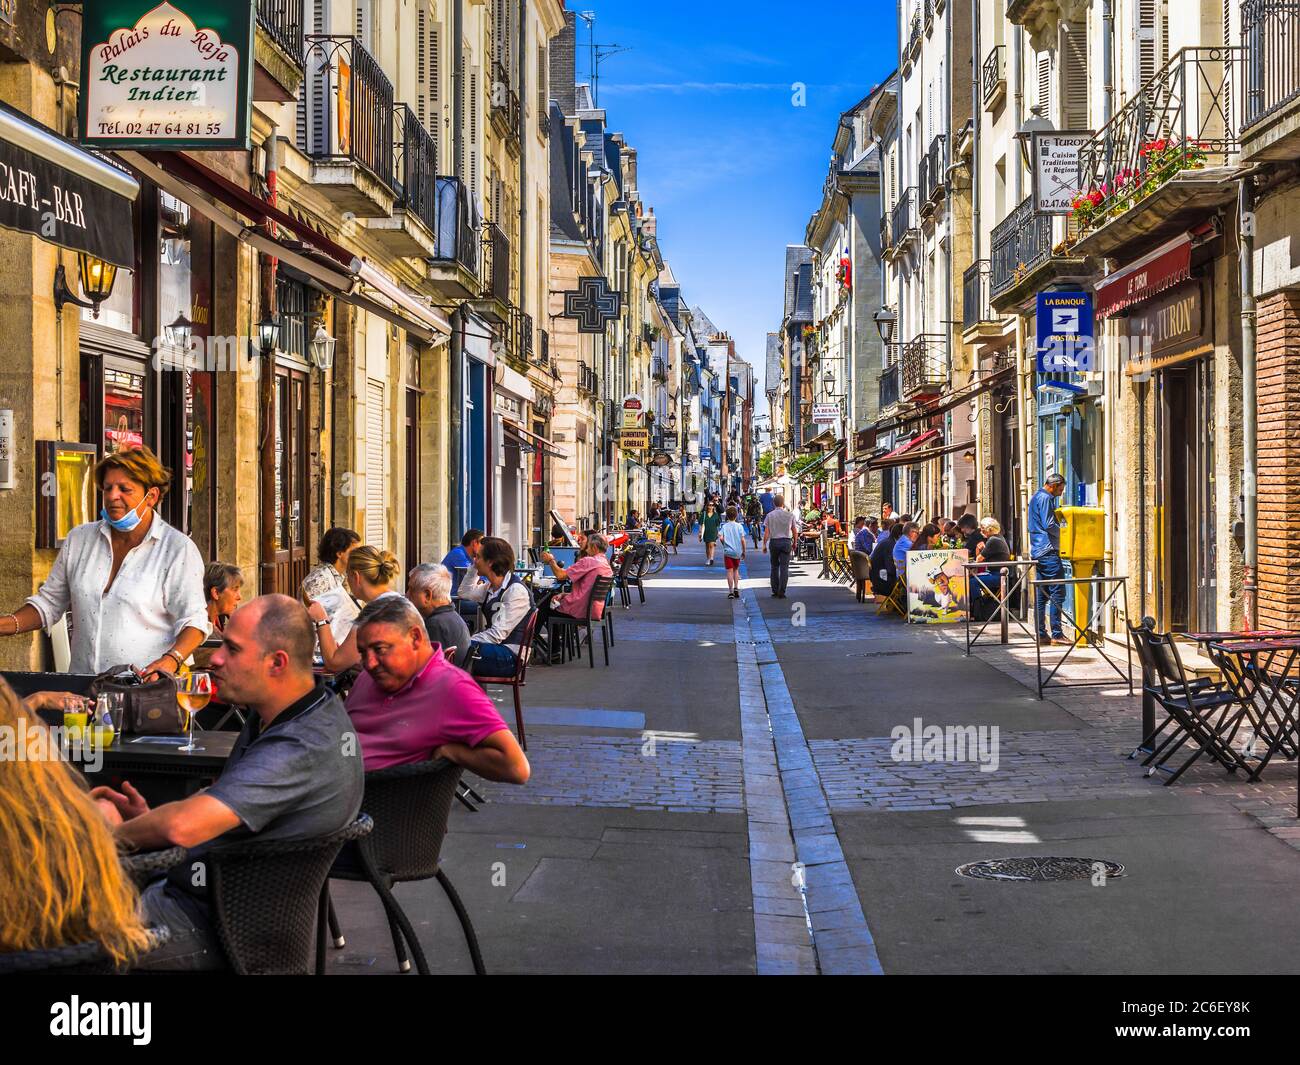 Lunchtime view of diners in cafes along Rue Colbert in the old quarter of Tours, Indre-et-Loire, France. Stock Photo